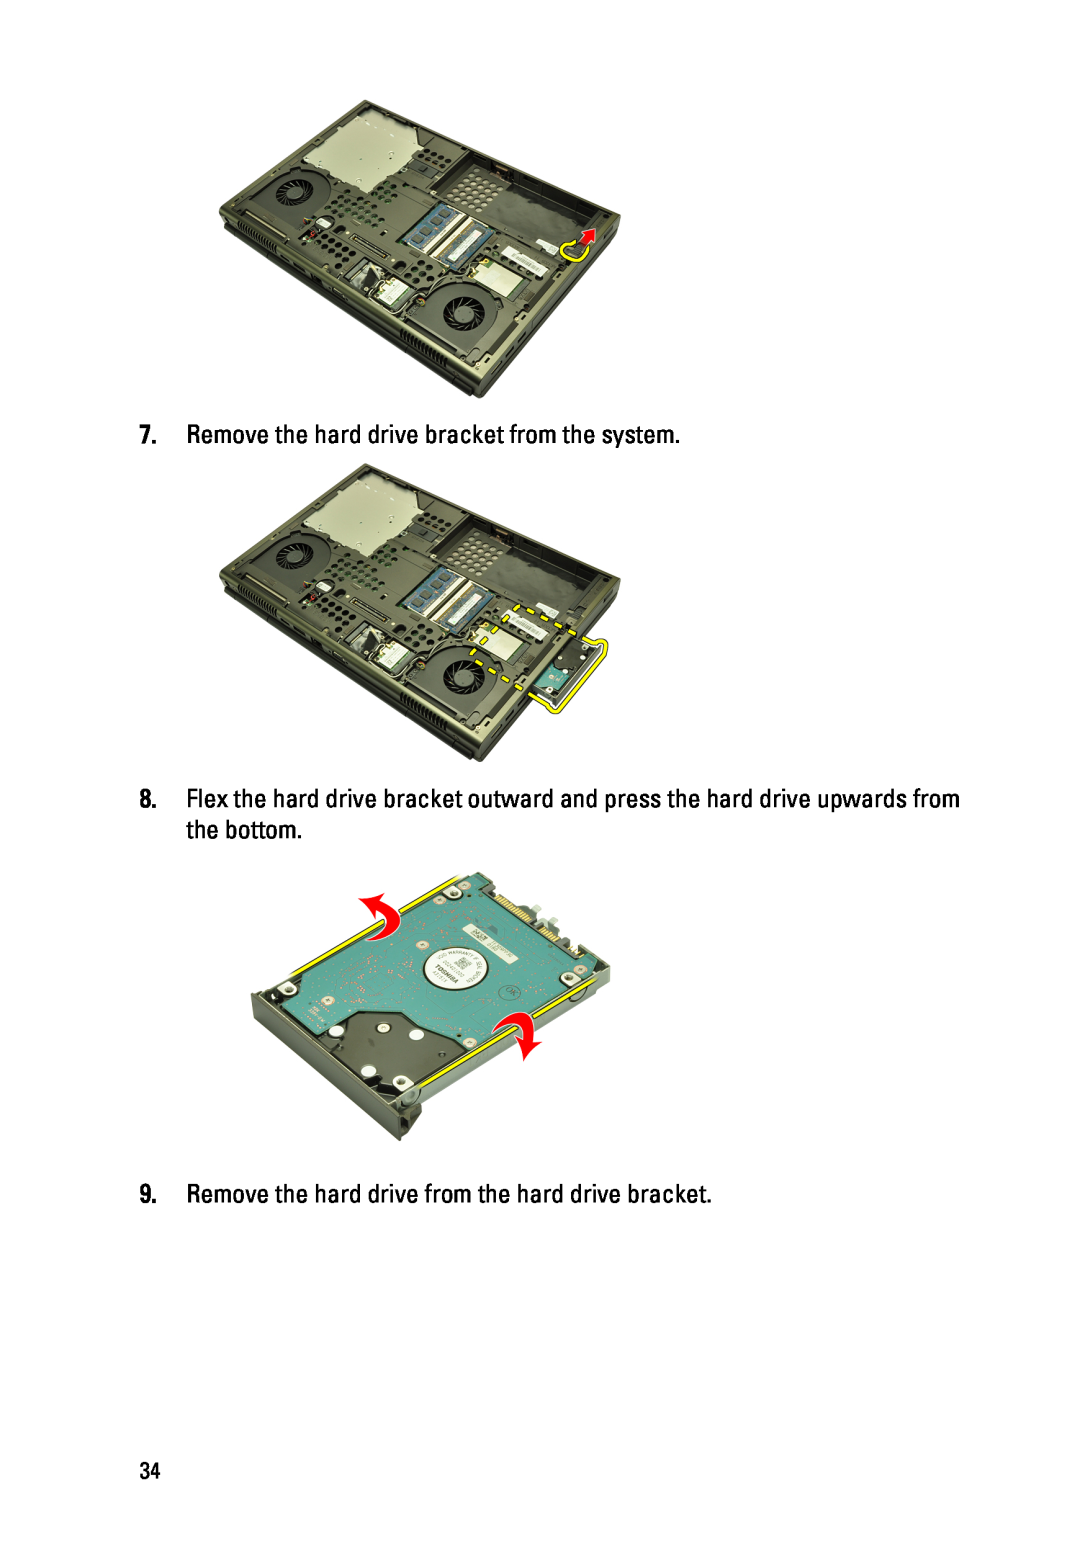 Dell M4600 owner manual Remove the hard drive bracket from the system, Remove the hard drive from the hard drive bracket 